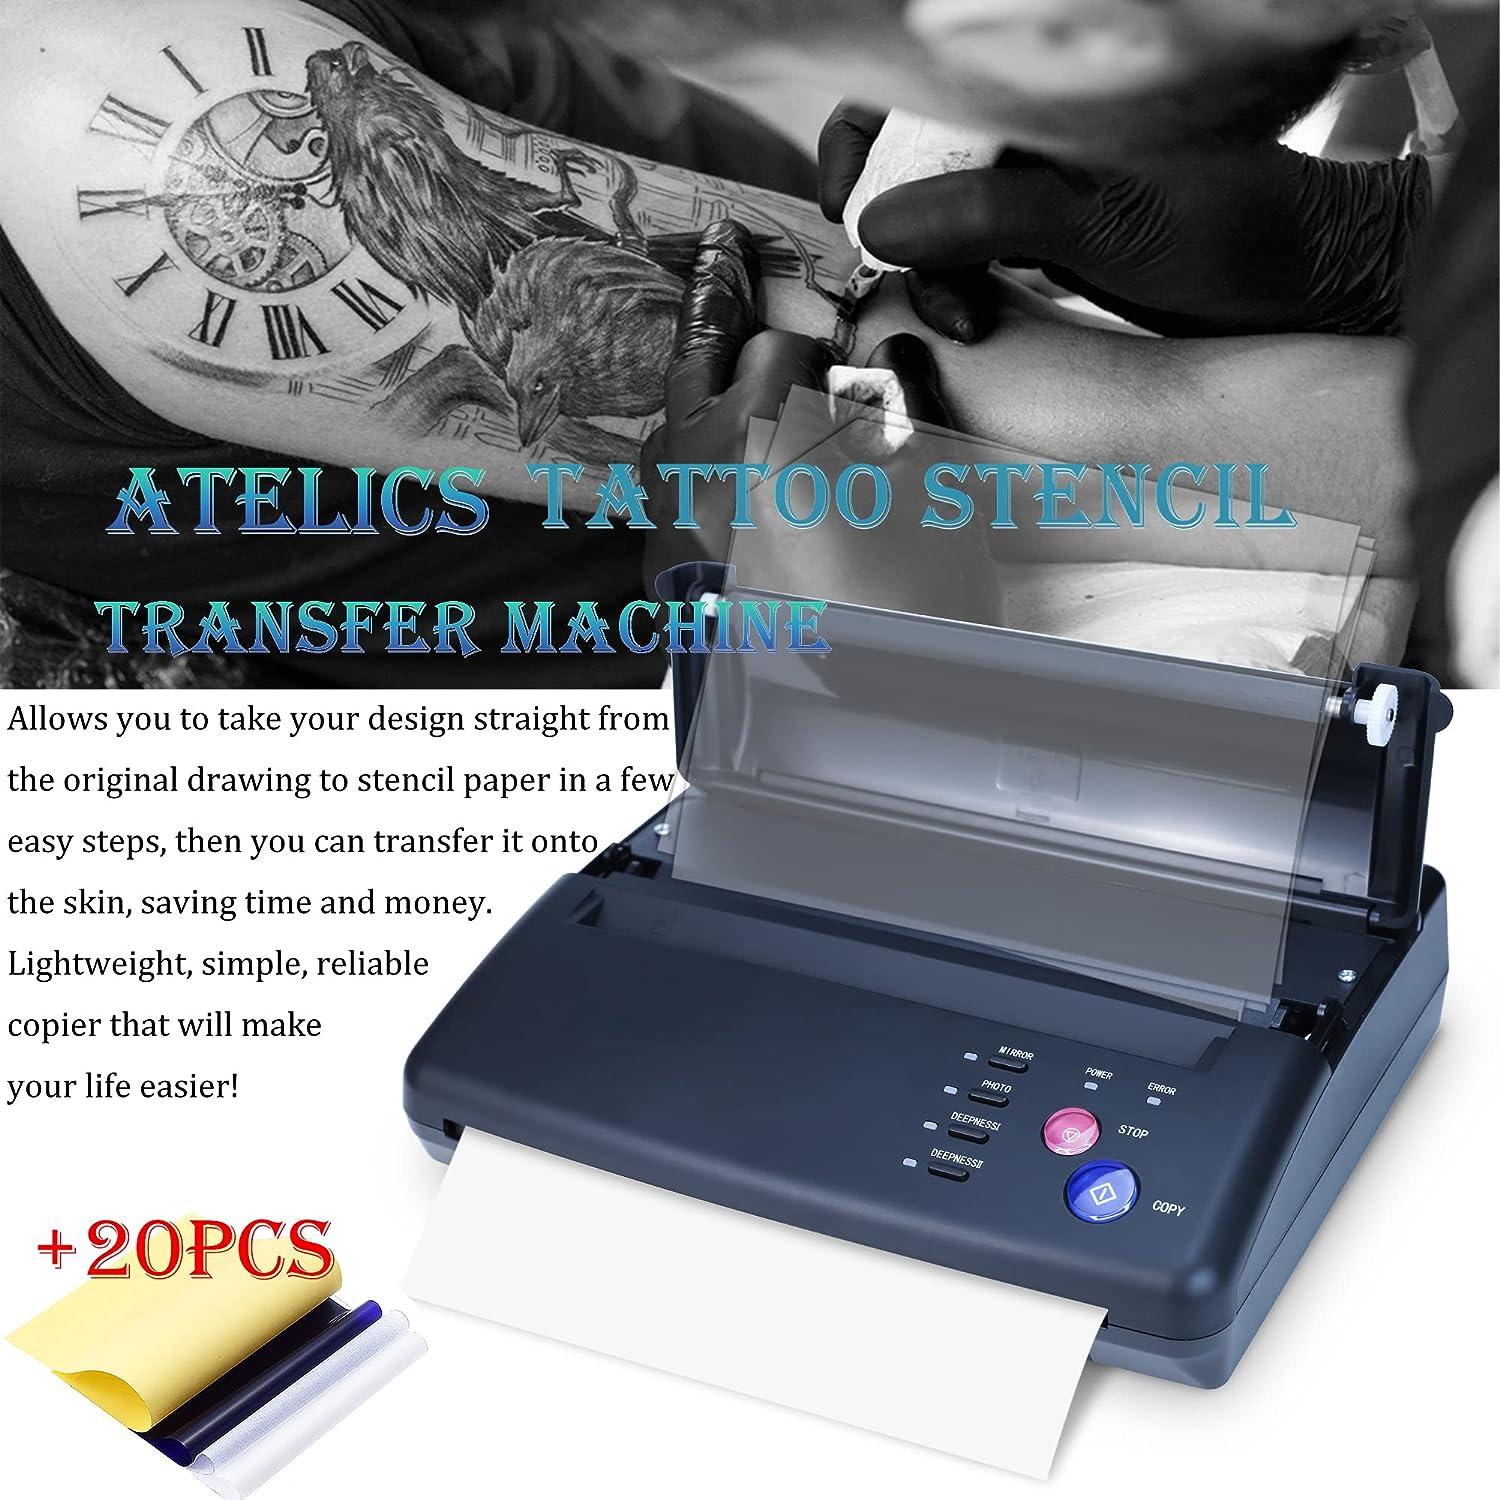 Get Perfectly Accurate Tattoos Every Time with Thermal Tattoo